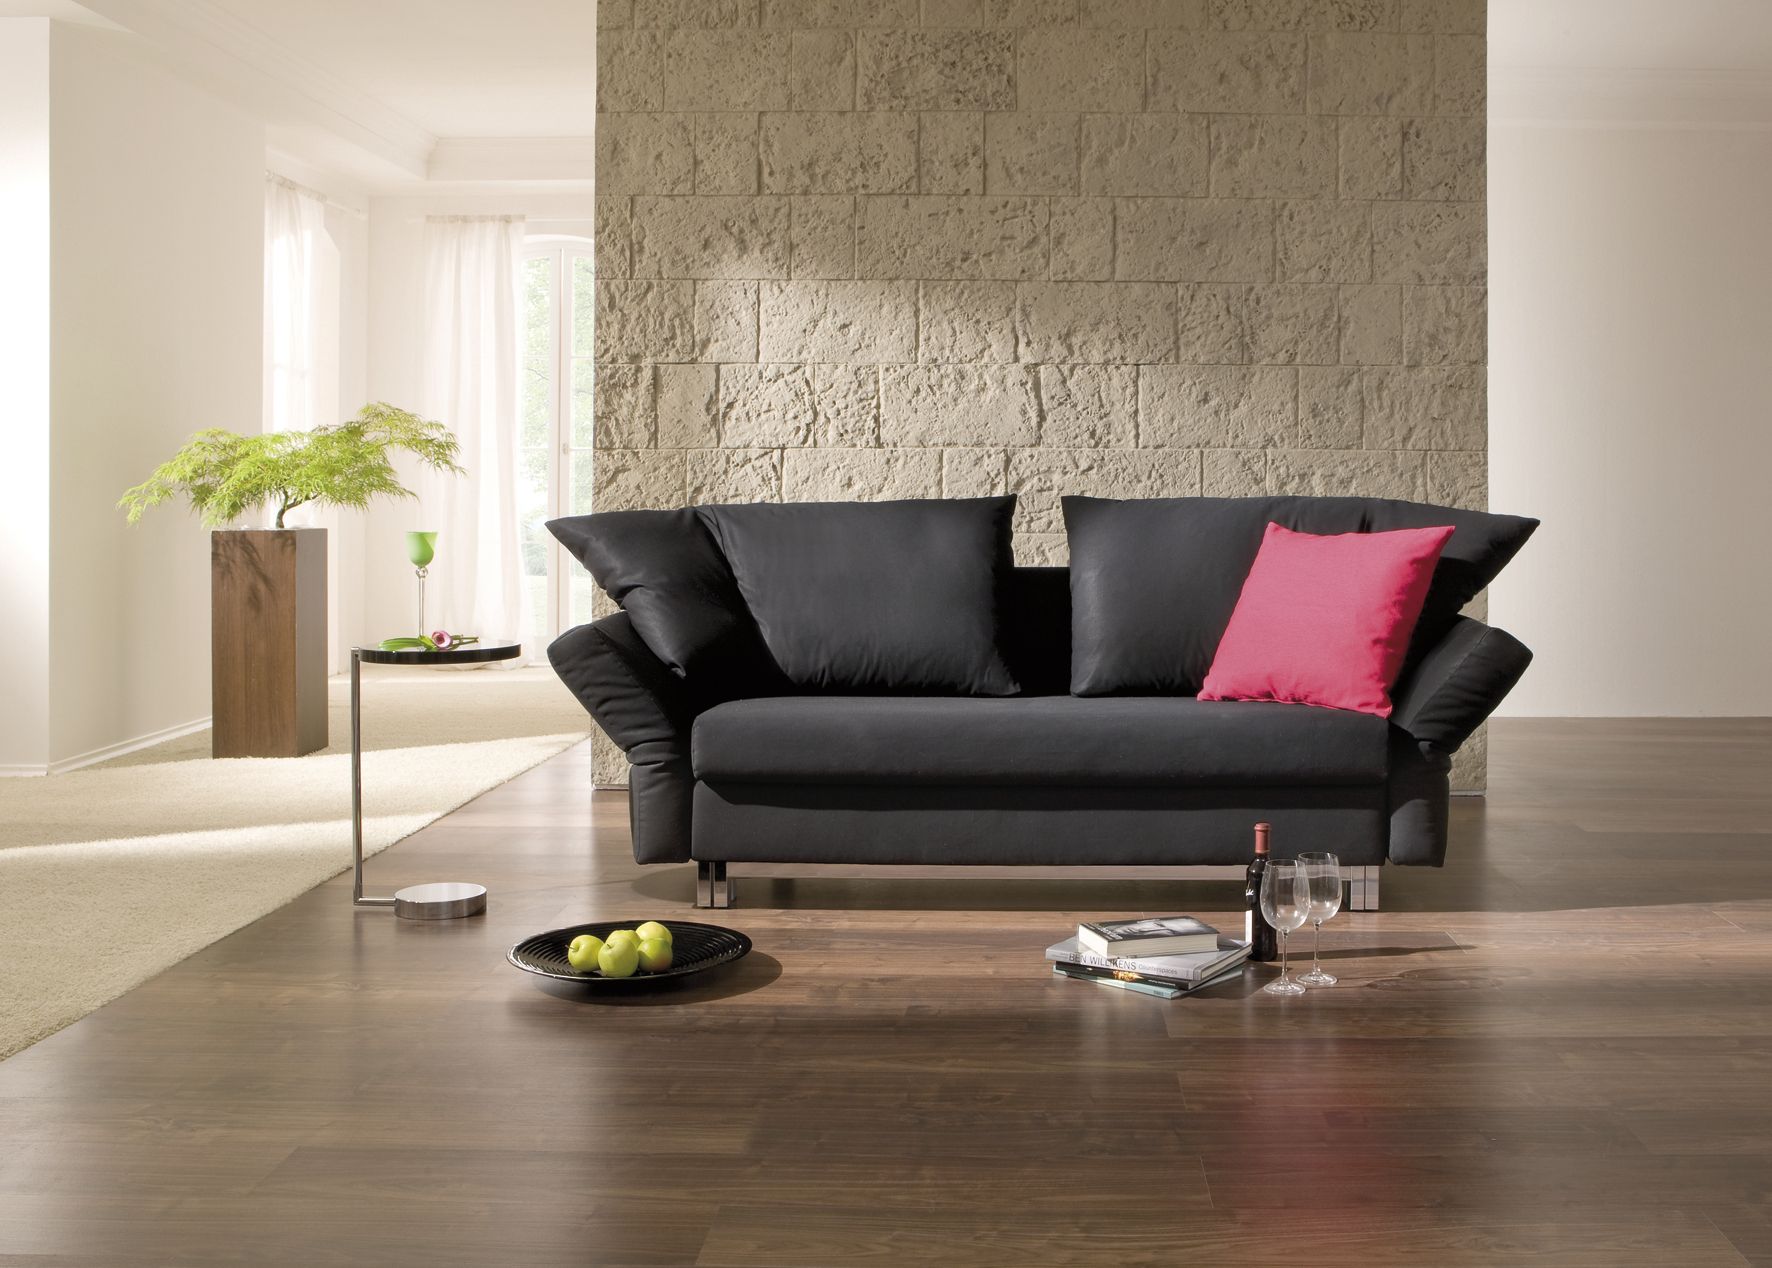 Black Best Fancy Comtemporary Black Best Sofas Ideas Fancy Sideboard Pink Accent Cushions Wooden Floor Stone Wall Furniture  Best Sofas Choice For Your Beautiful Room 